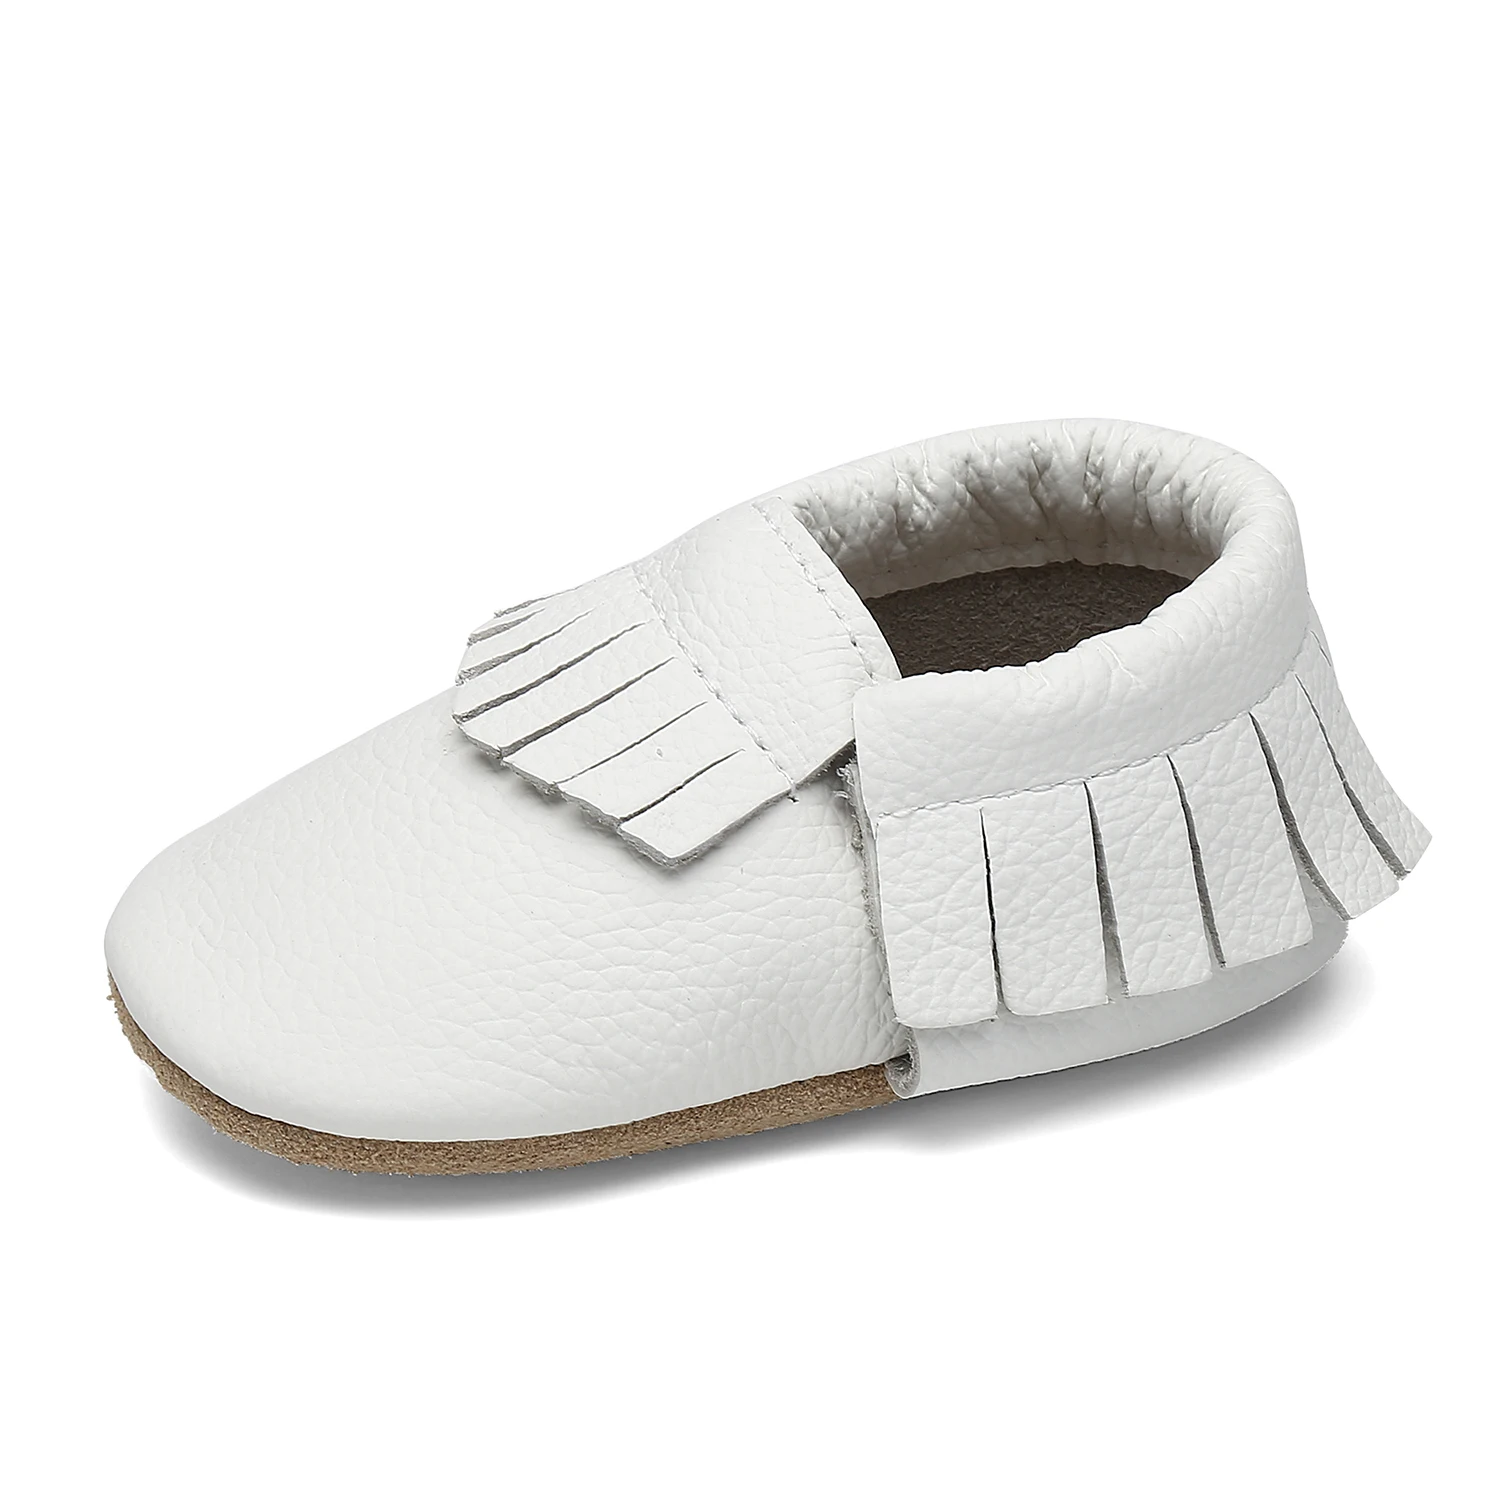 

Soft Sole Genuine Leather Little Girls White Moccasins Baby Casual Toddler Shoes, 7 colors